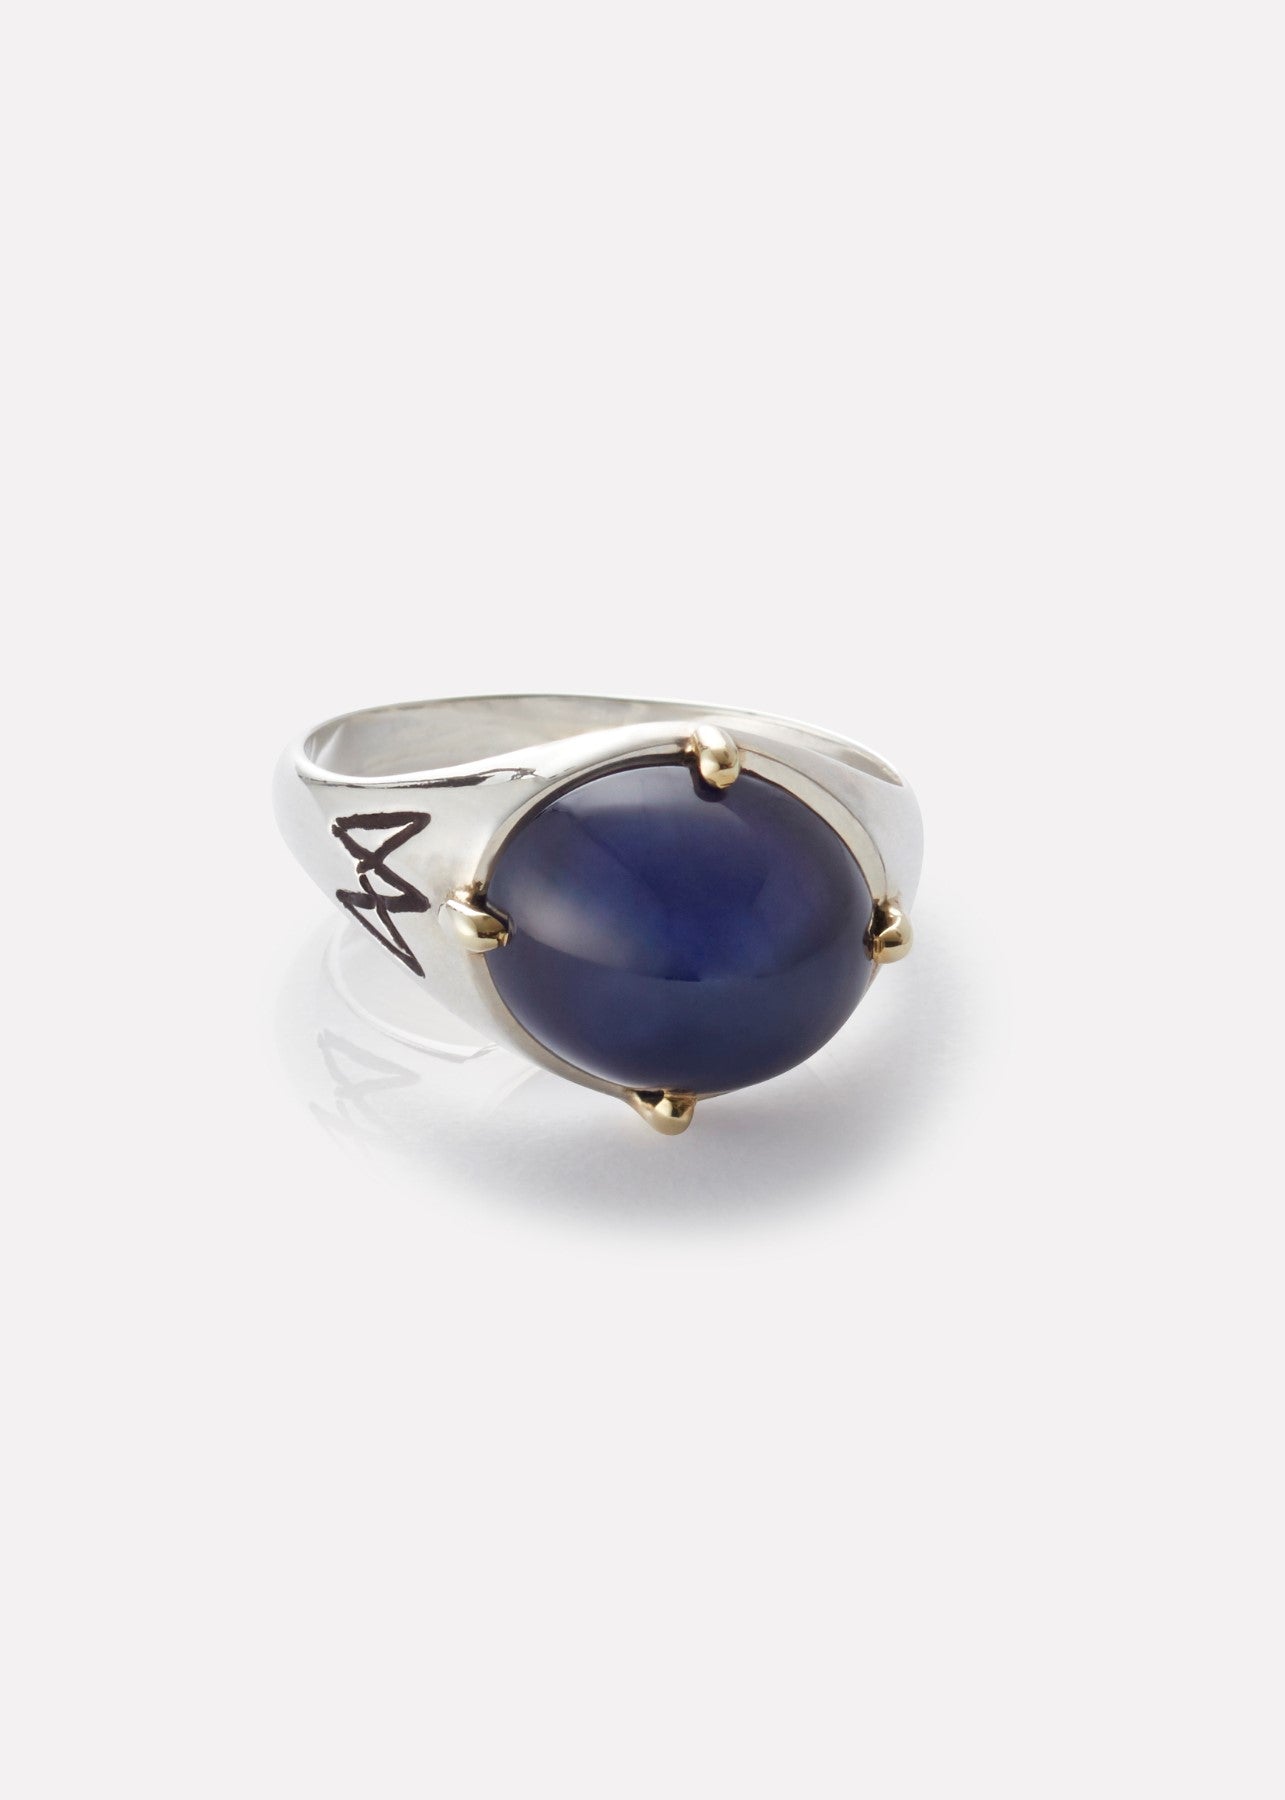 Unisex ring with gold claws and star sapphire